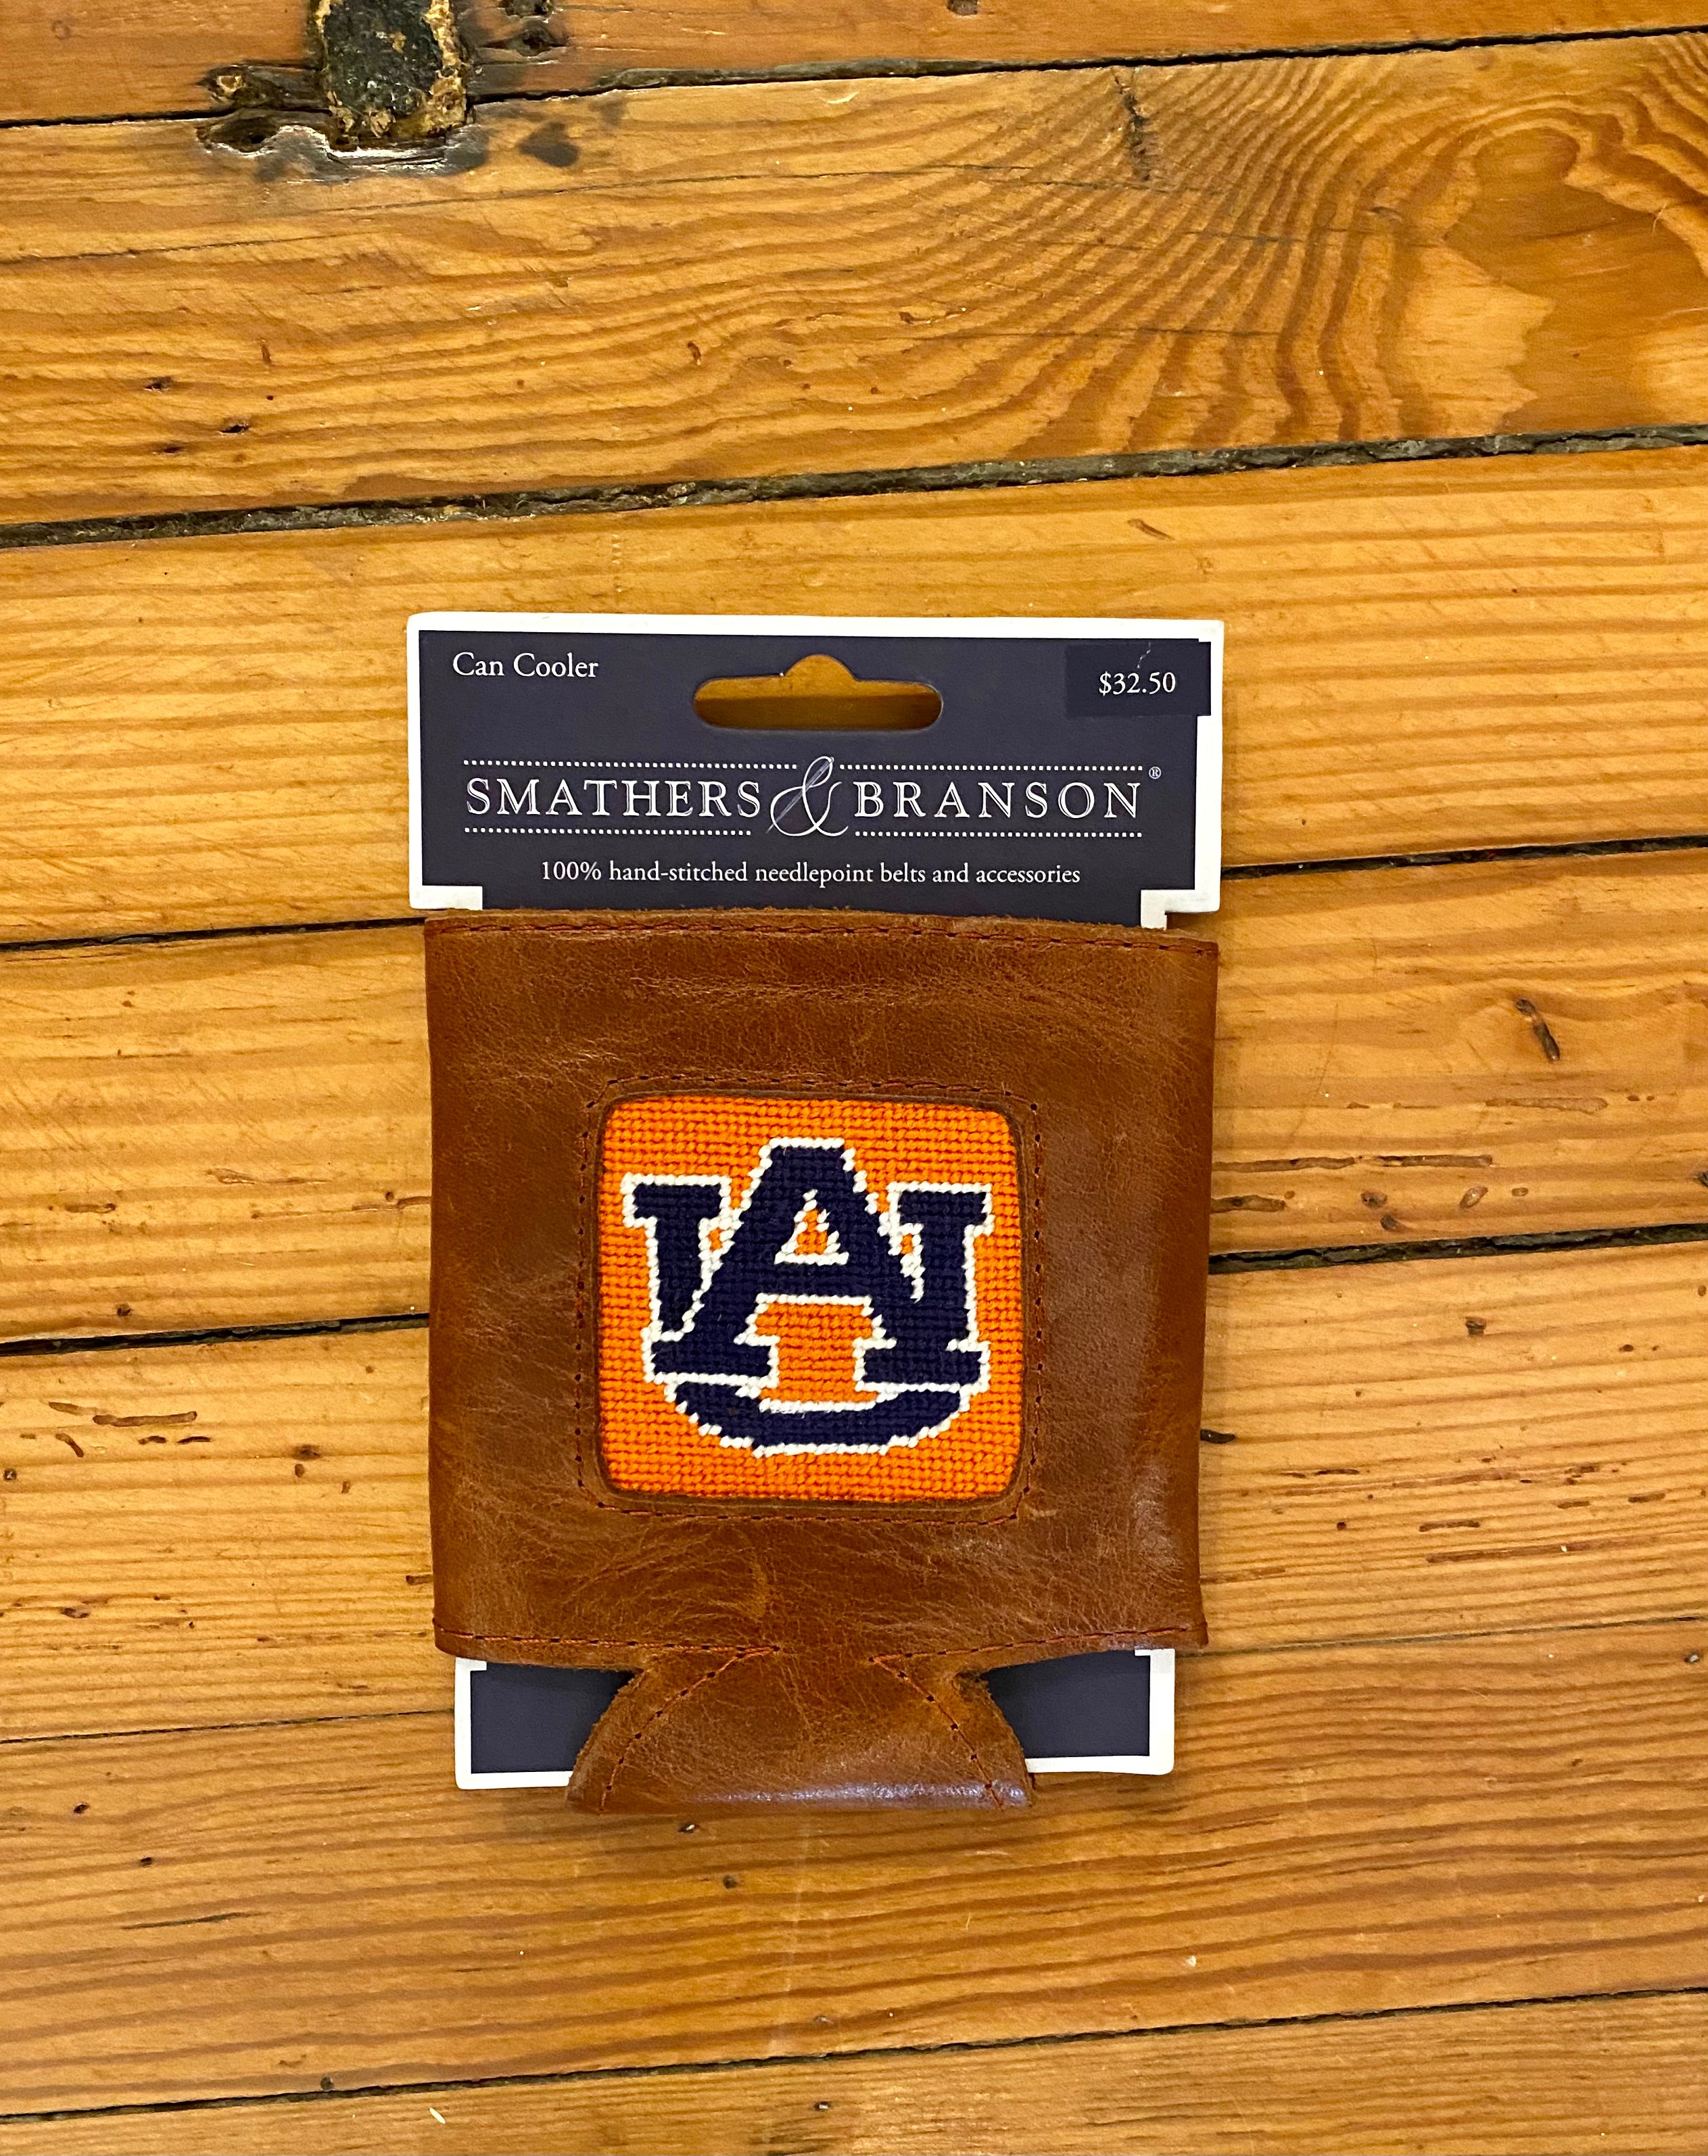 gt smathers and branson can cooler